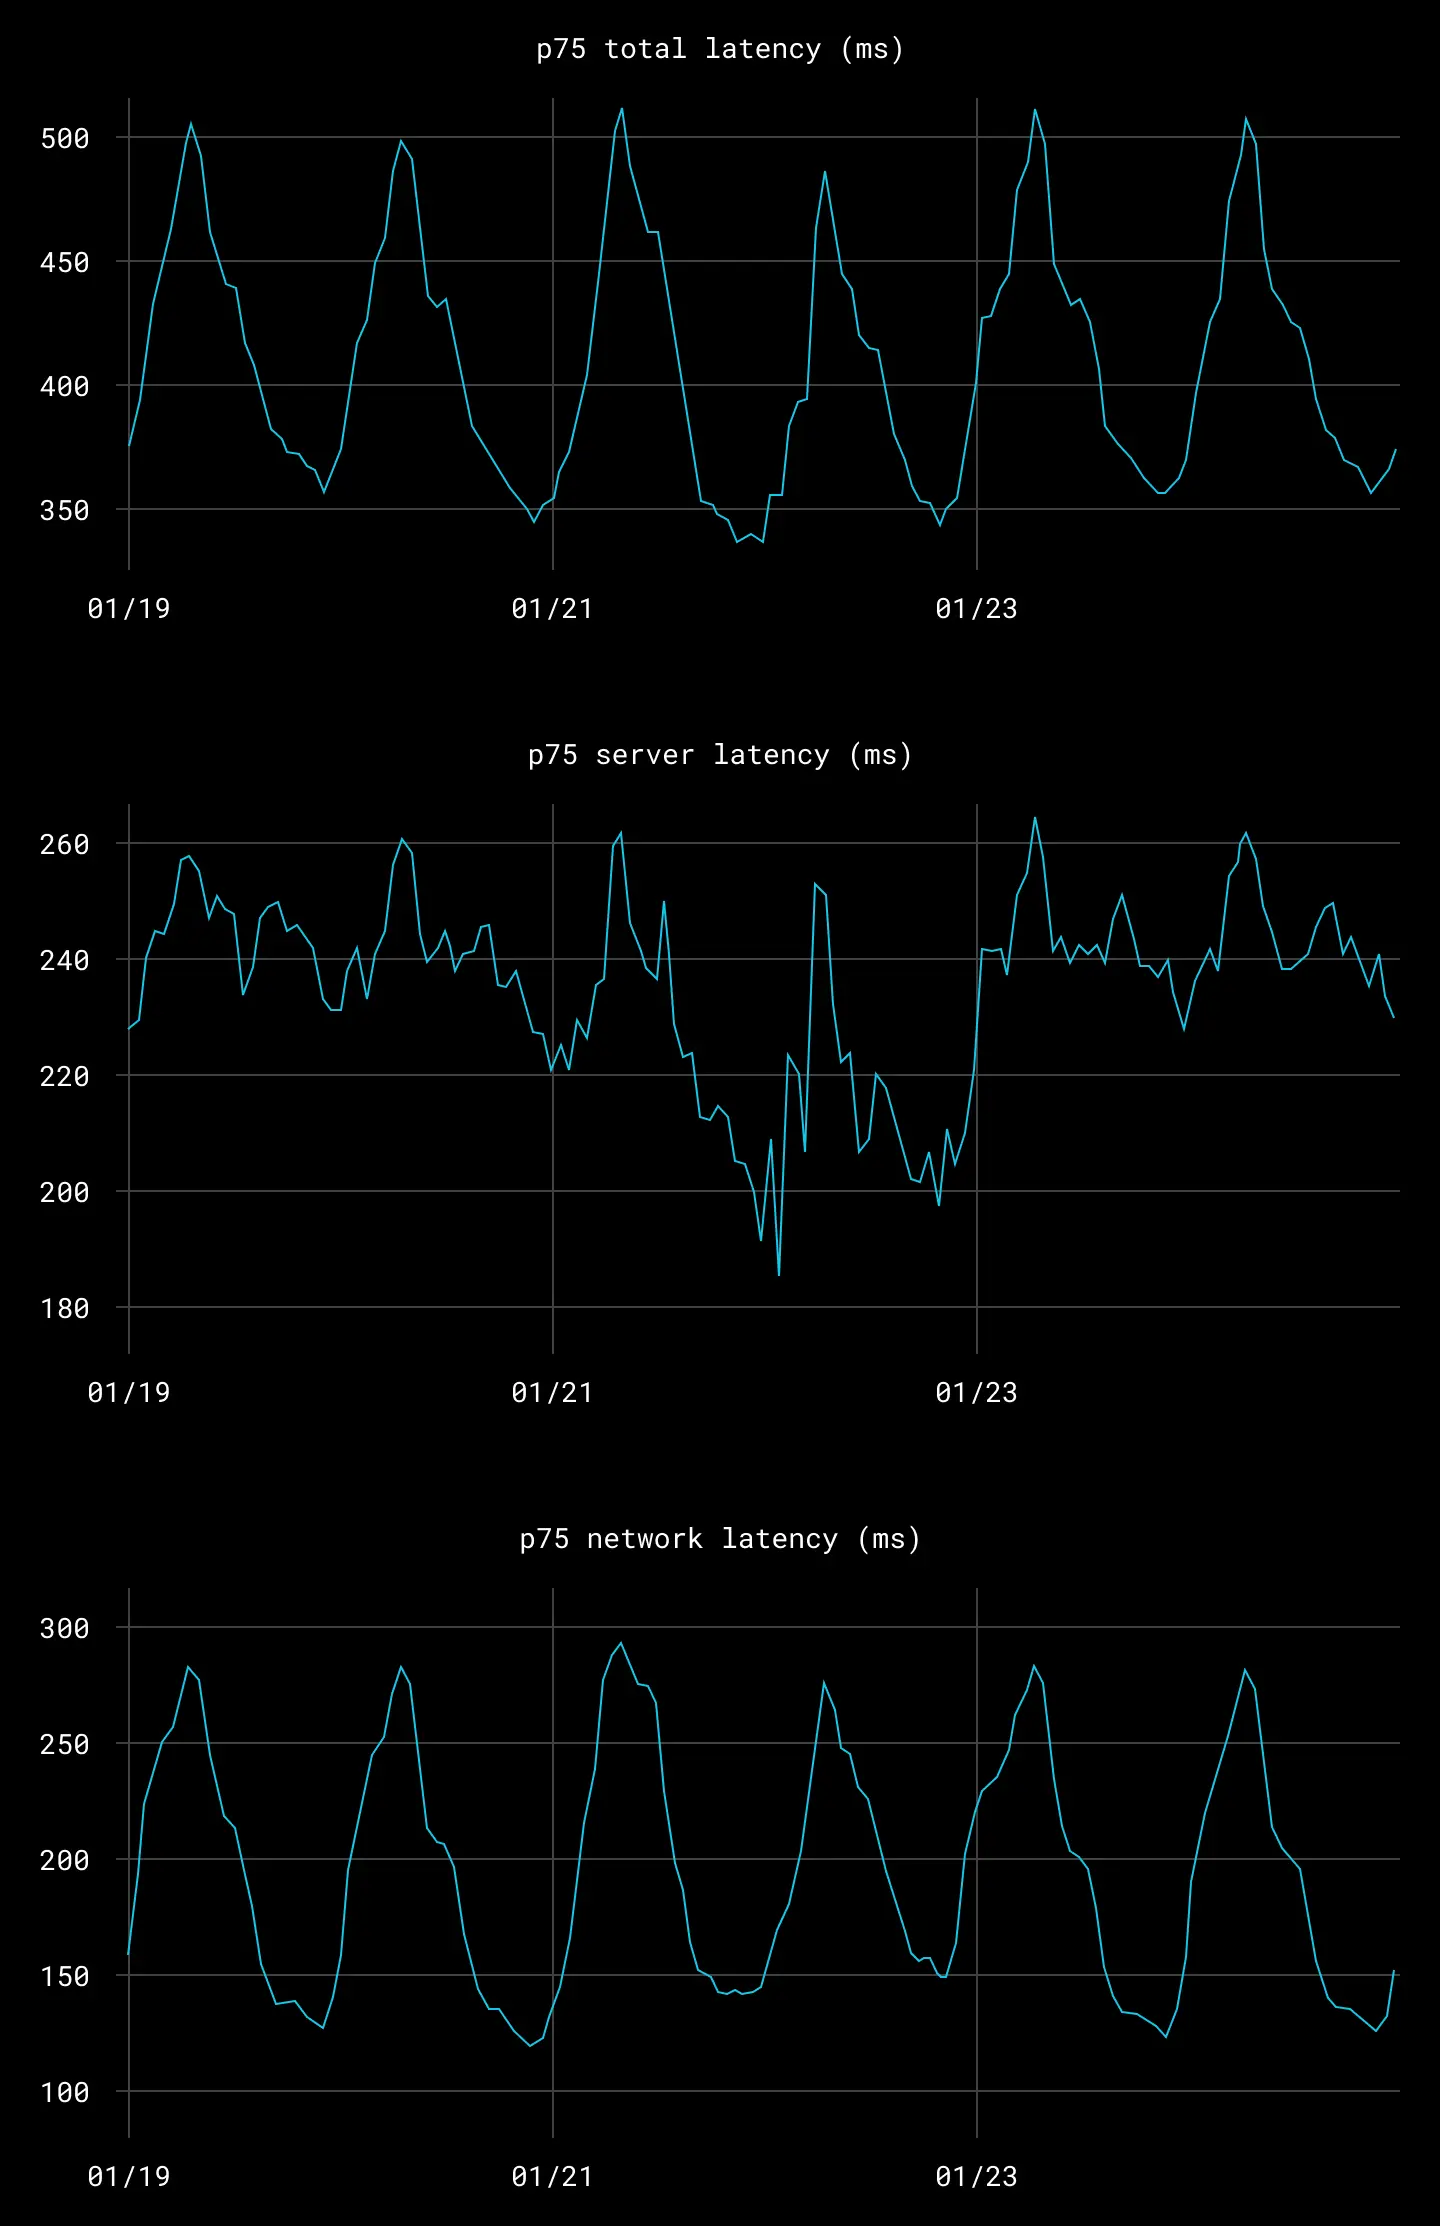 Three graphs showing changes in p75 network, server, and combined latency (in miliseconds) respectively over the course of a week. When viewed sperately, it's clear that network latency is significantly more variable than server latency.